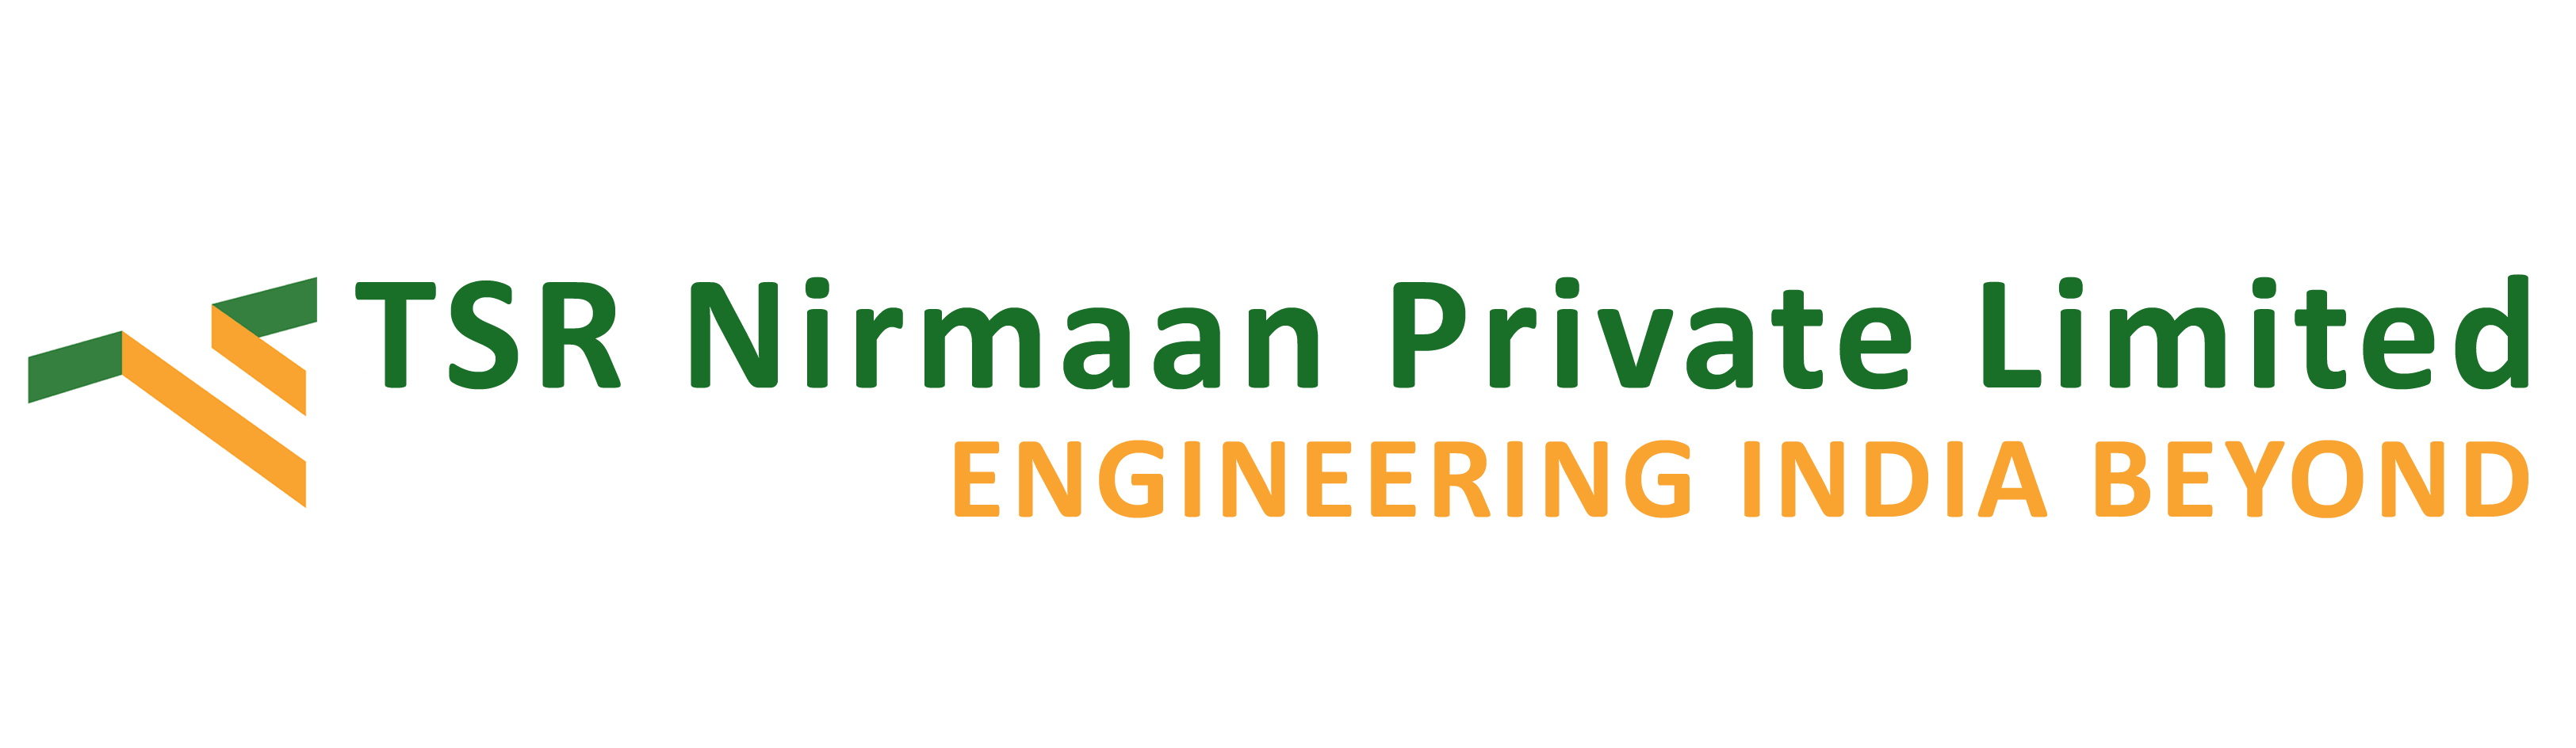 TSR NIRMAAN PRIVATE LIMITED